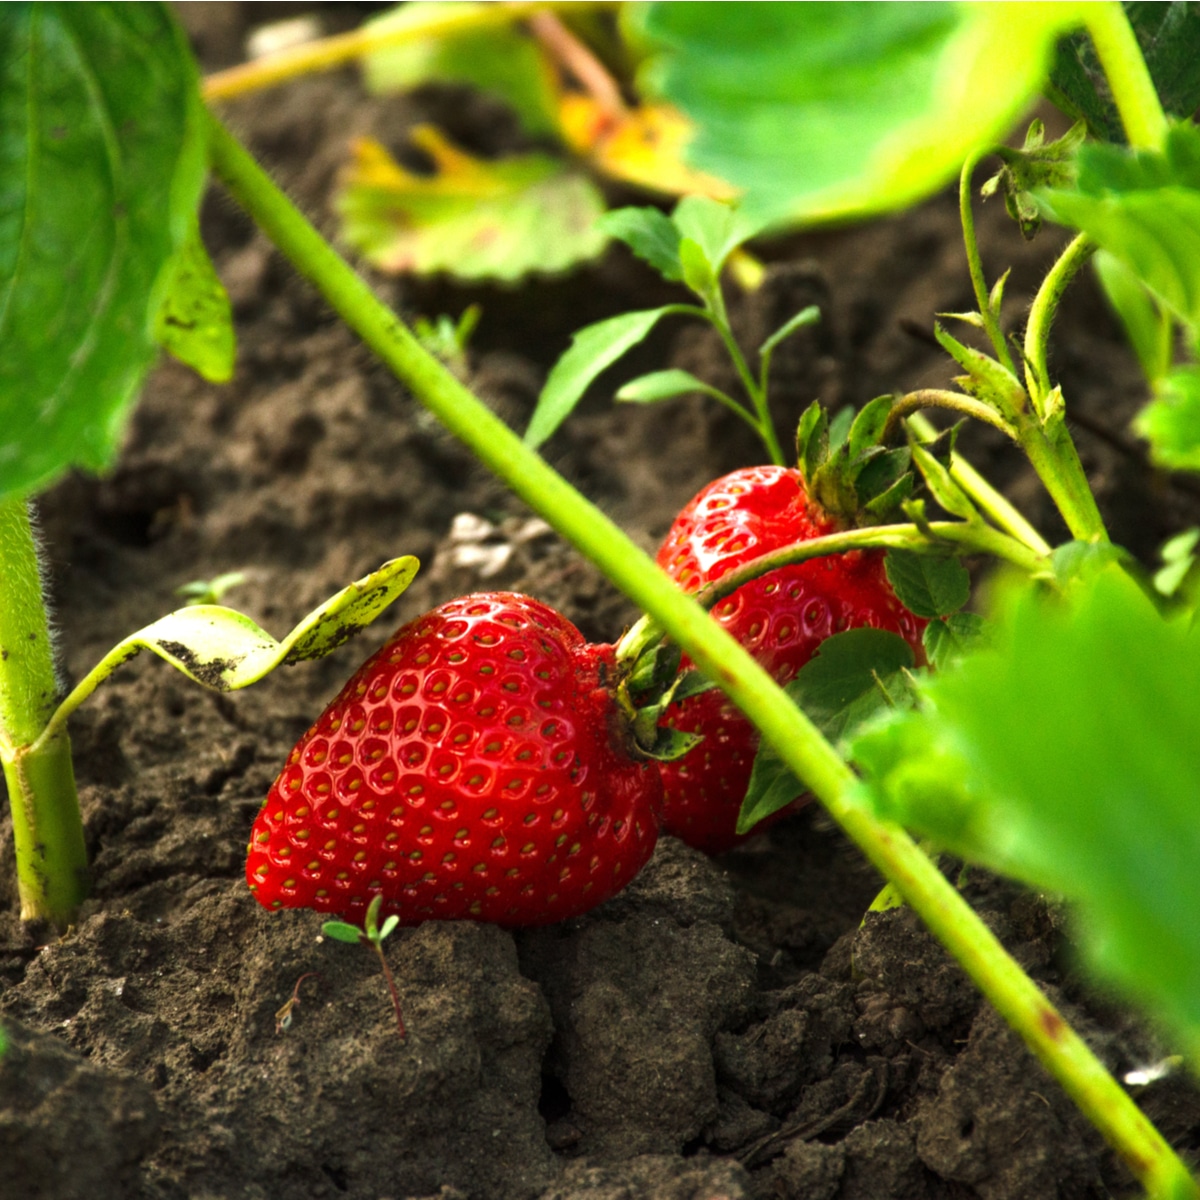 WATCH: The strawberry hack to show you how to remove the stem